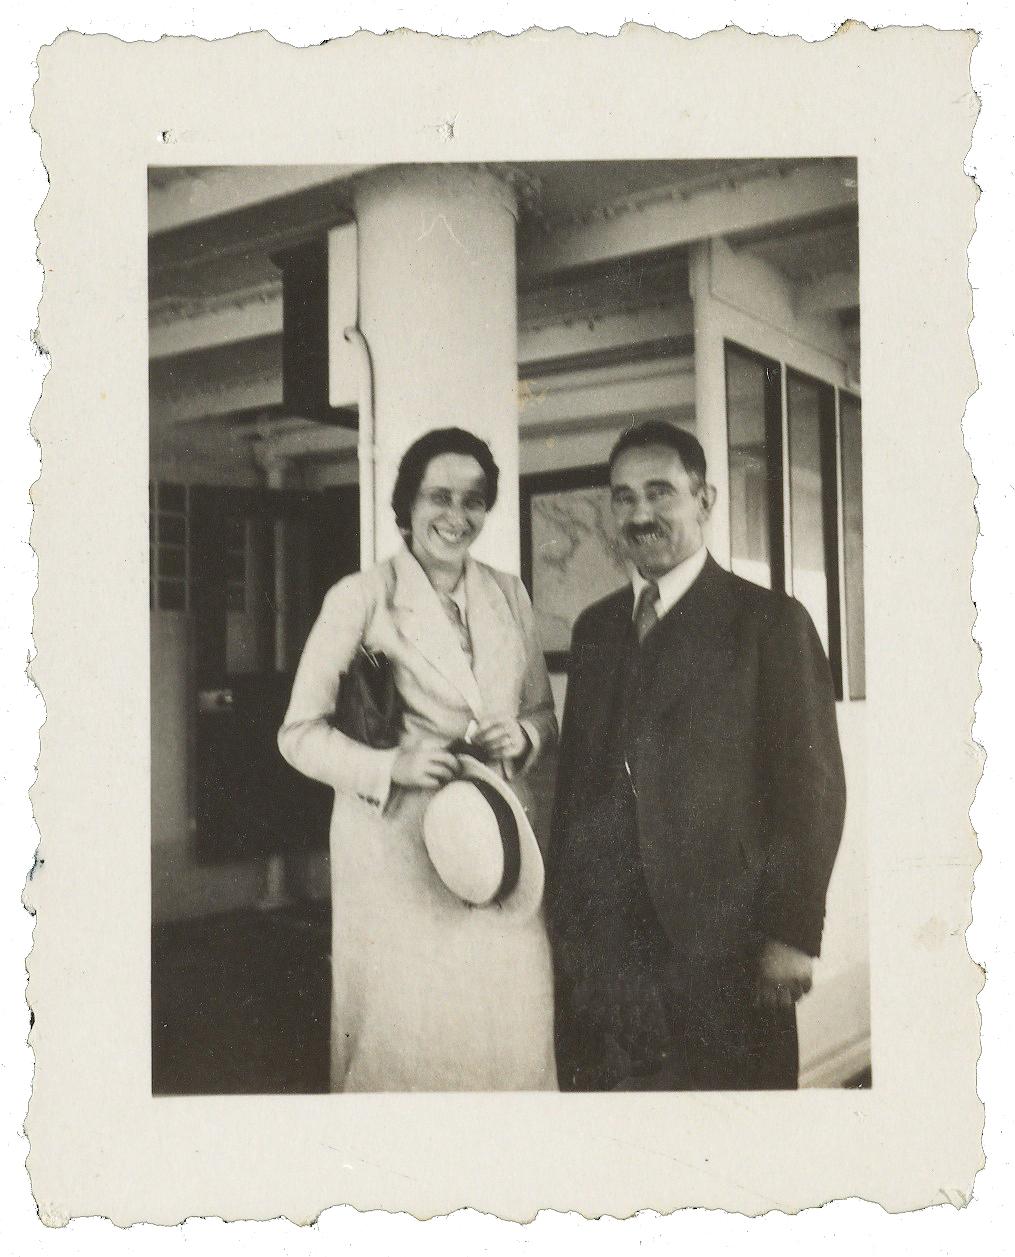 Arendt, smiling and wearing a long white coat, holding a hat, stands next to a moustached man in a dark suit